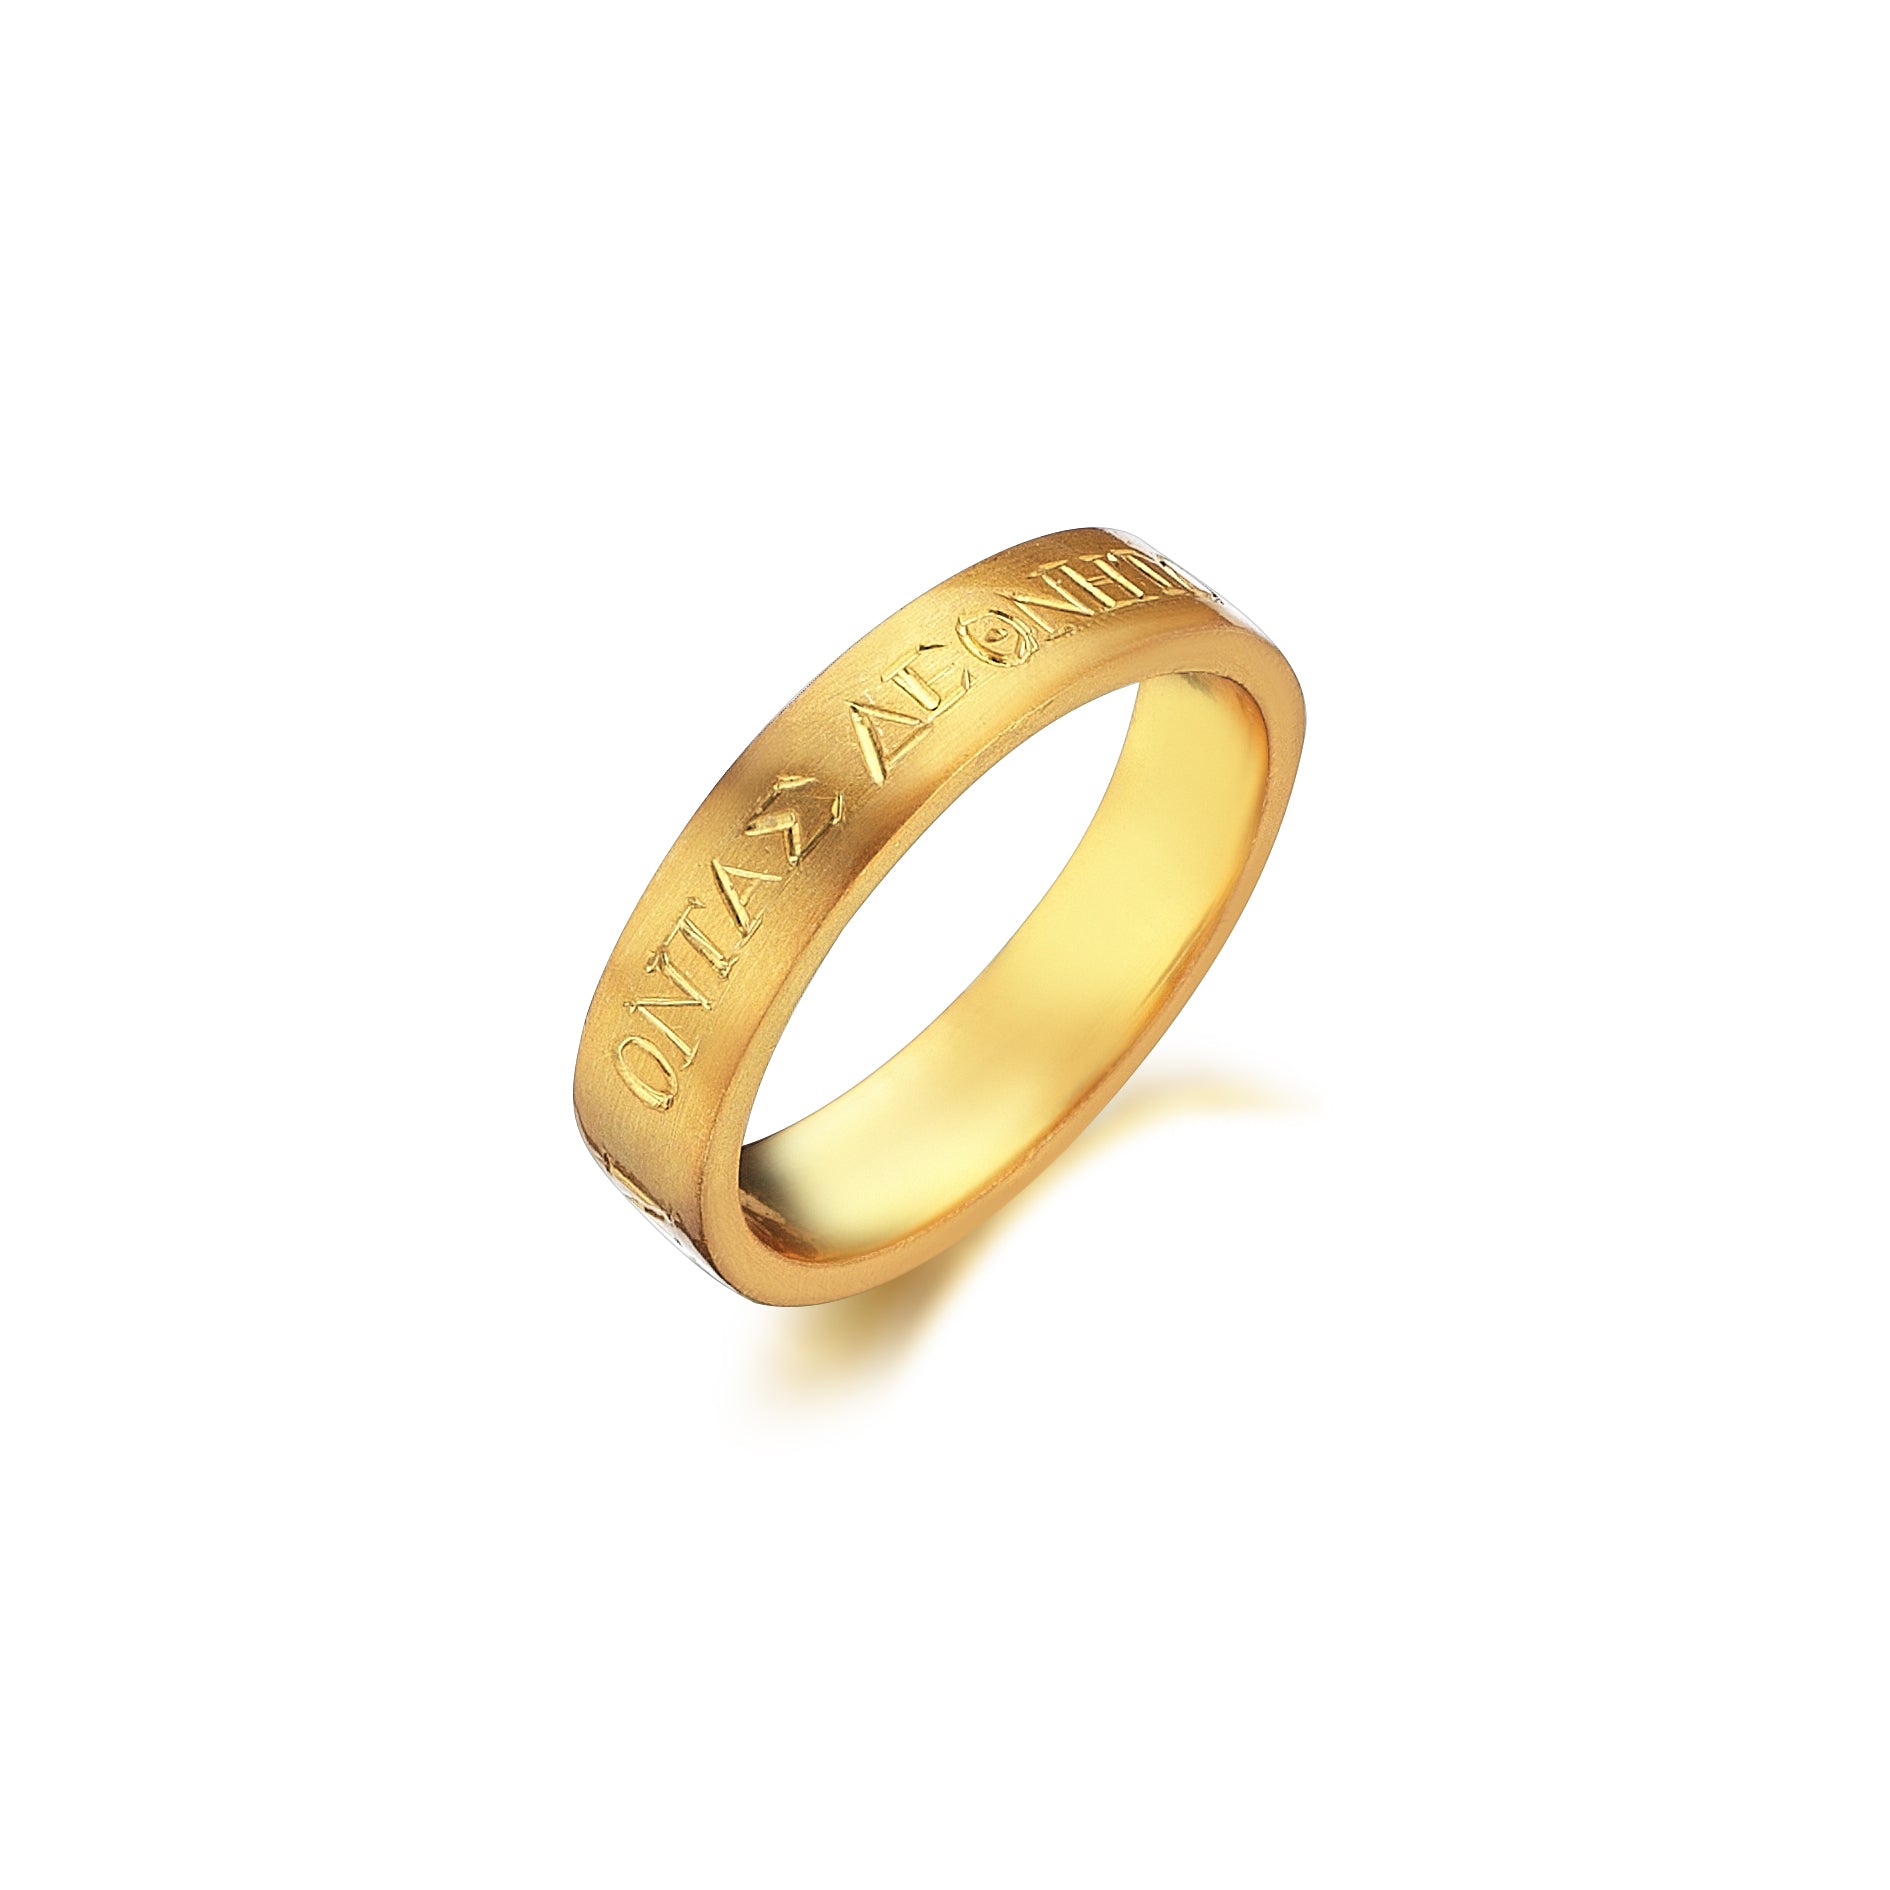 THE GRECIAN RING